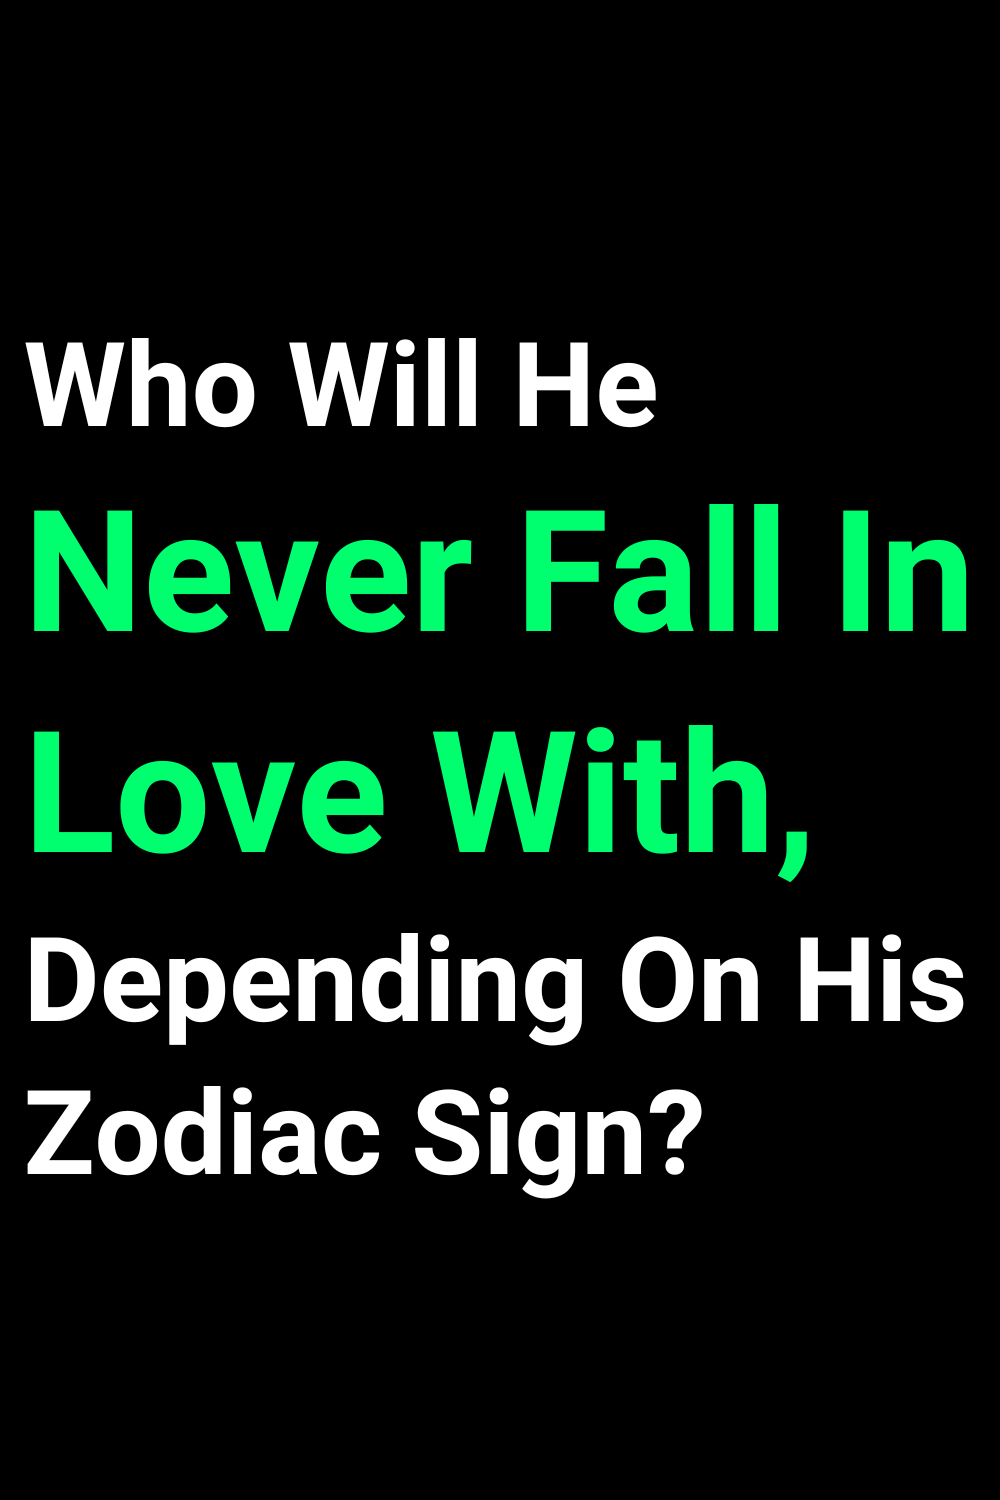 Who Will He Never Fall In Love With, Depending On His Zodiac Sign?